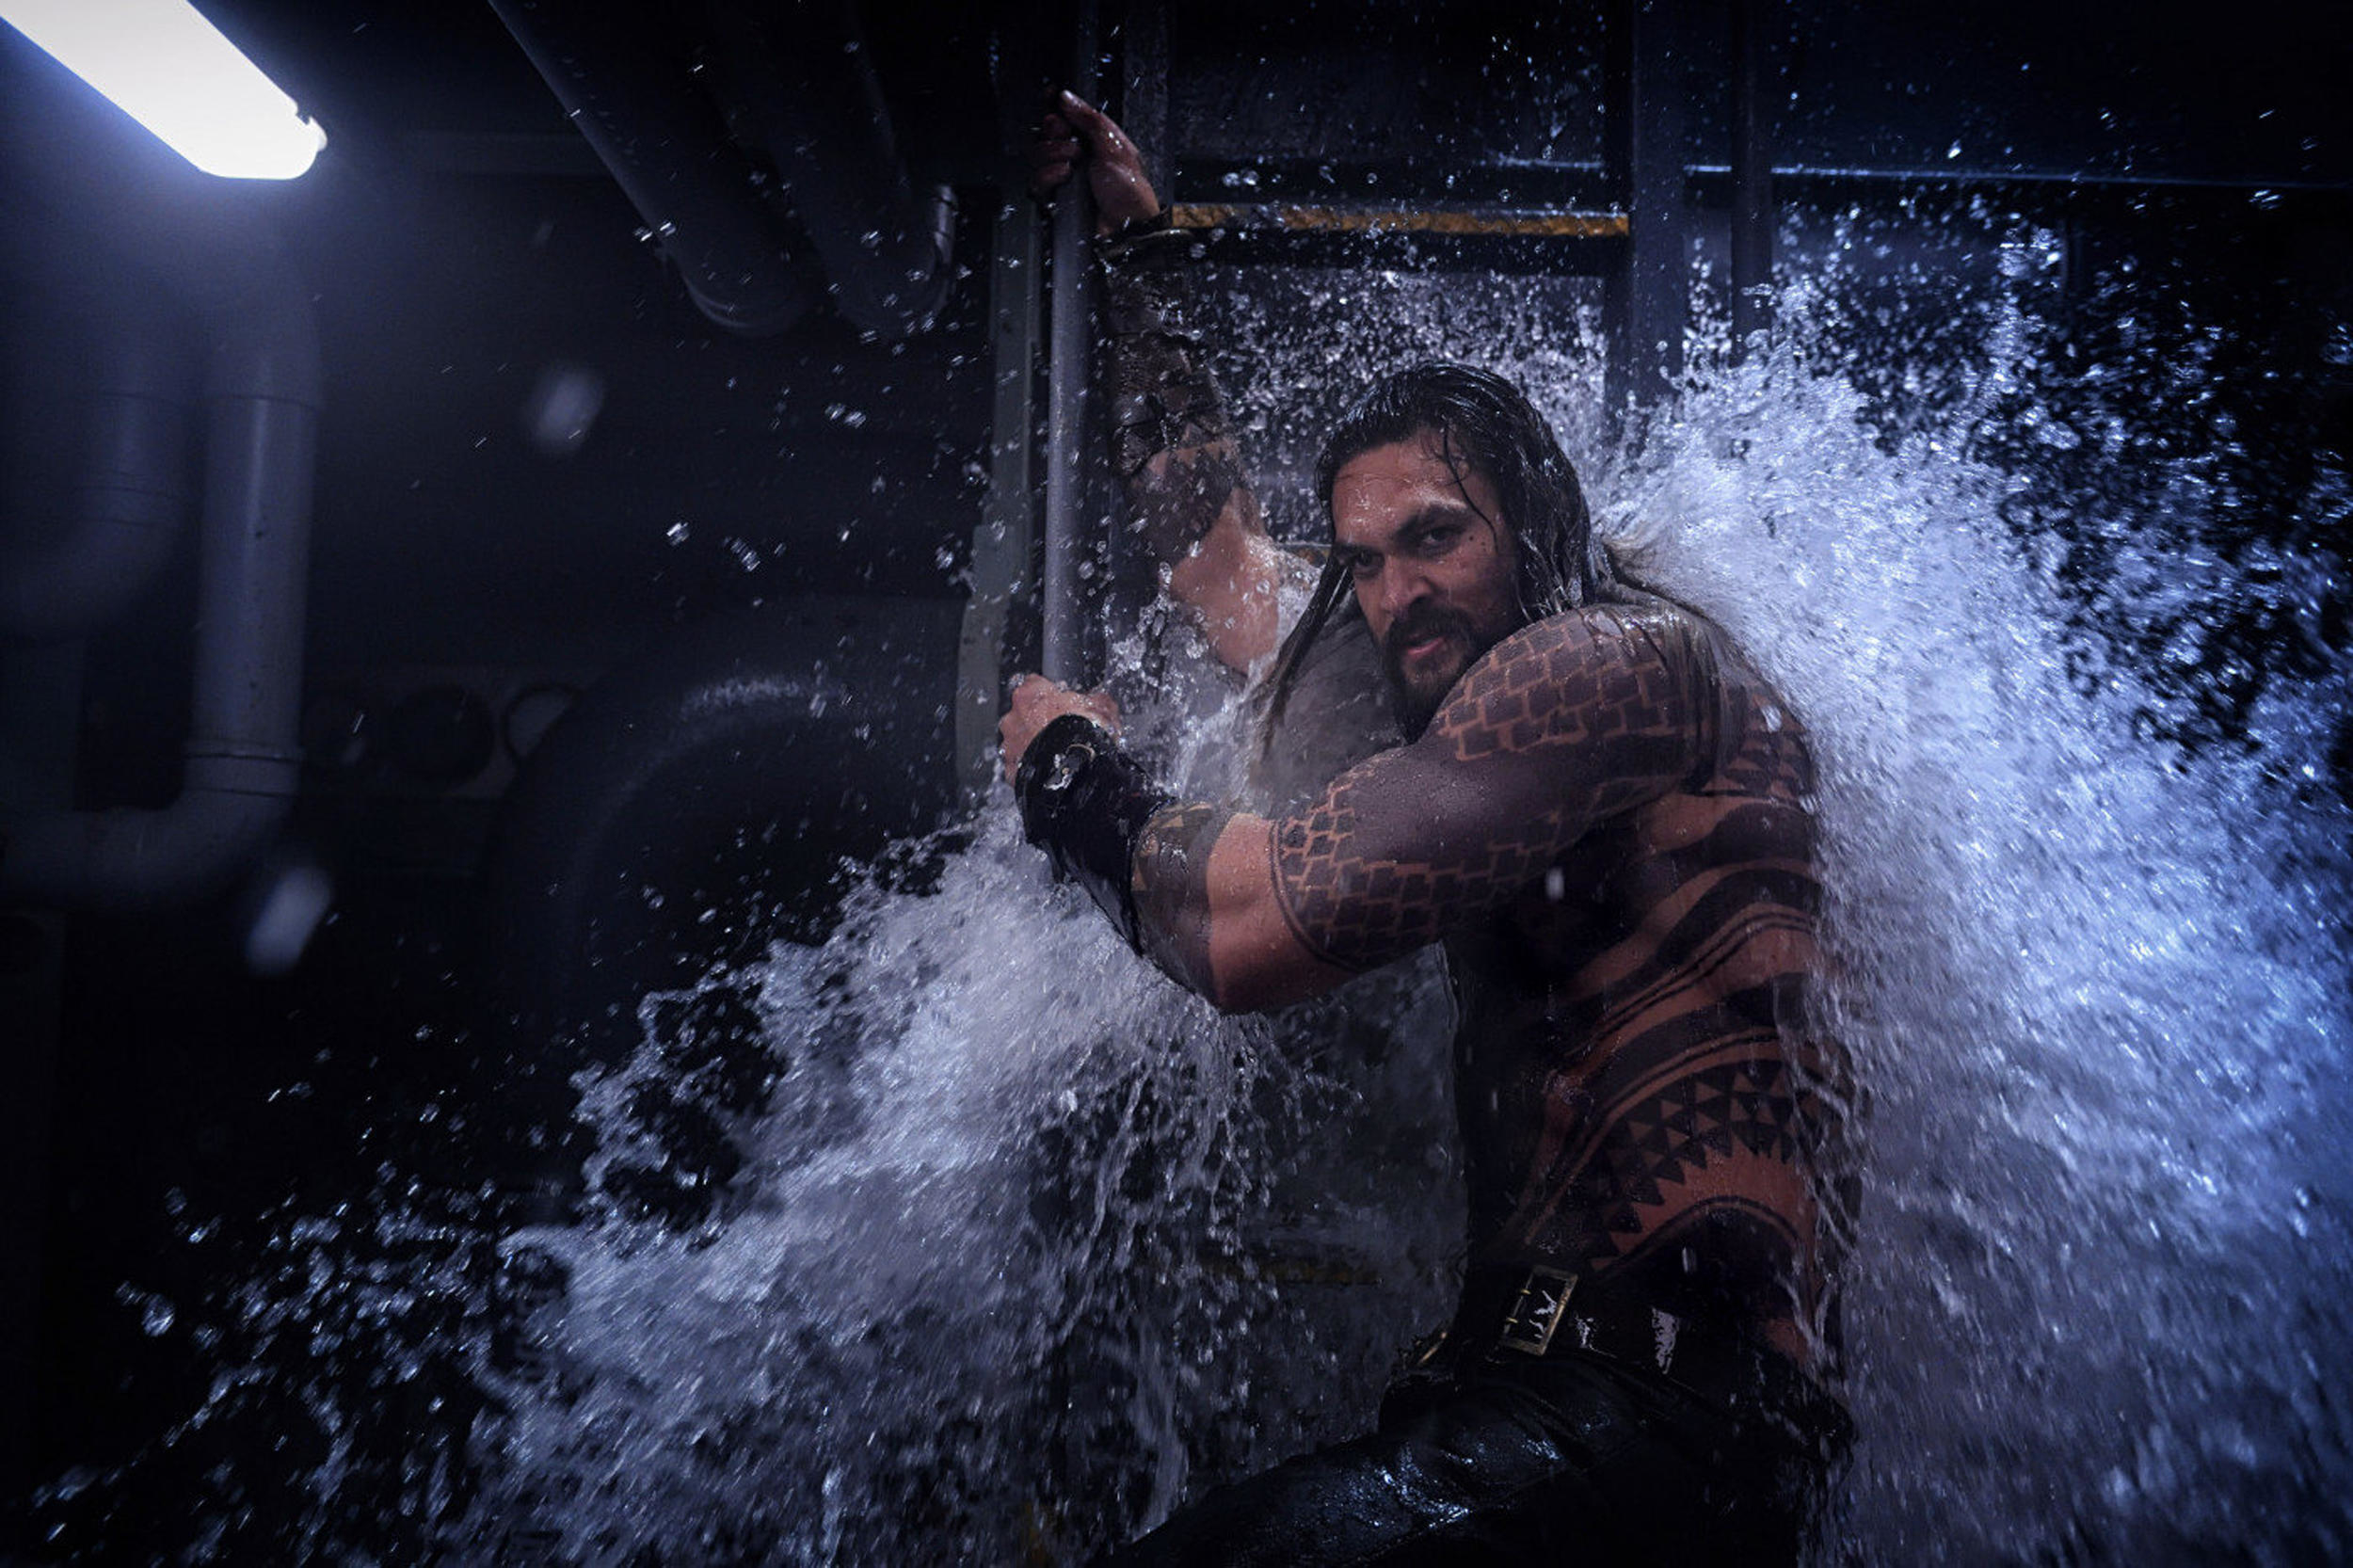 Jason Momoa blocks an incoming wave of water with his body